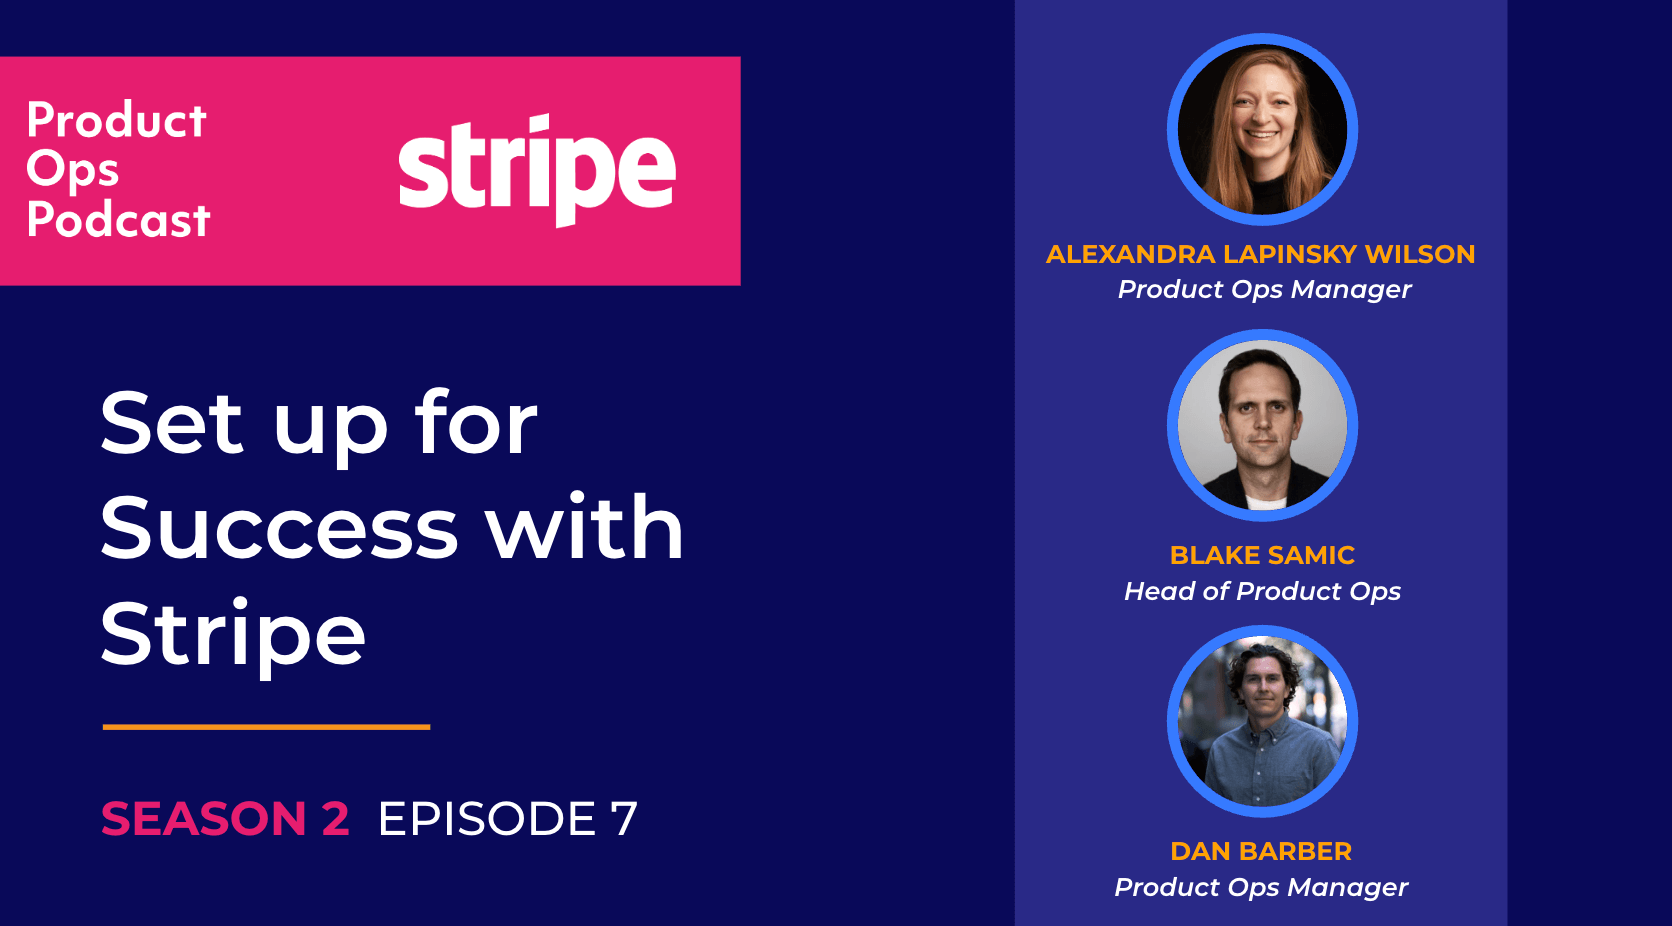 Set up for success, with Stripe